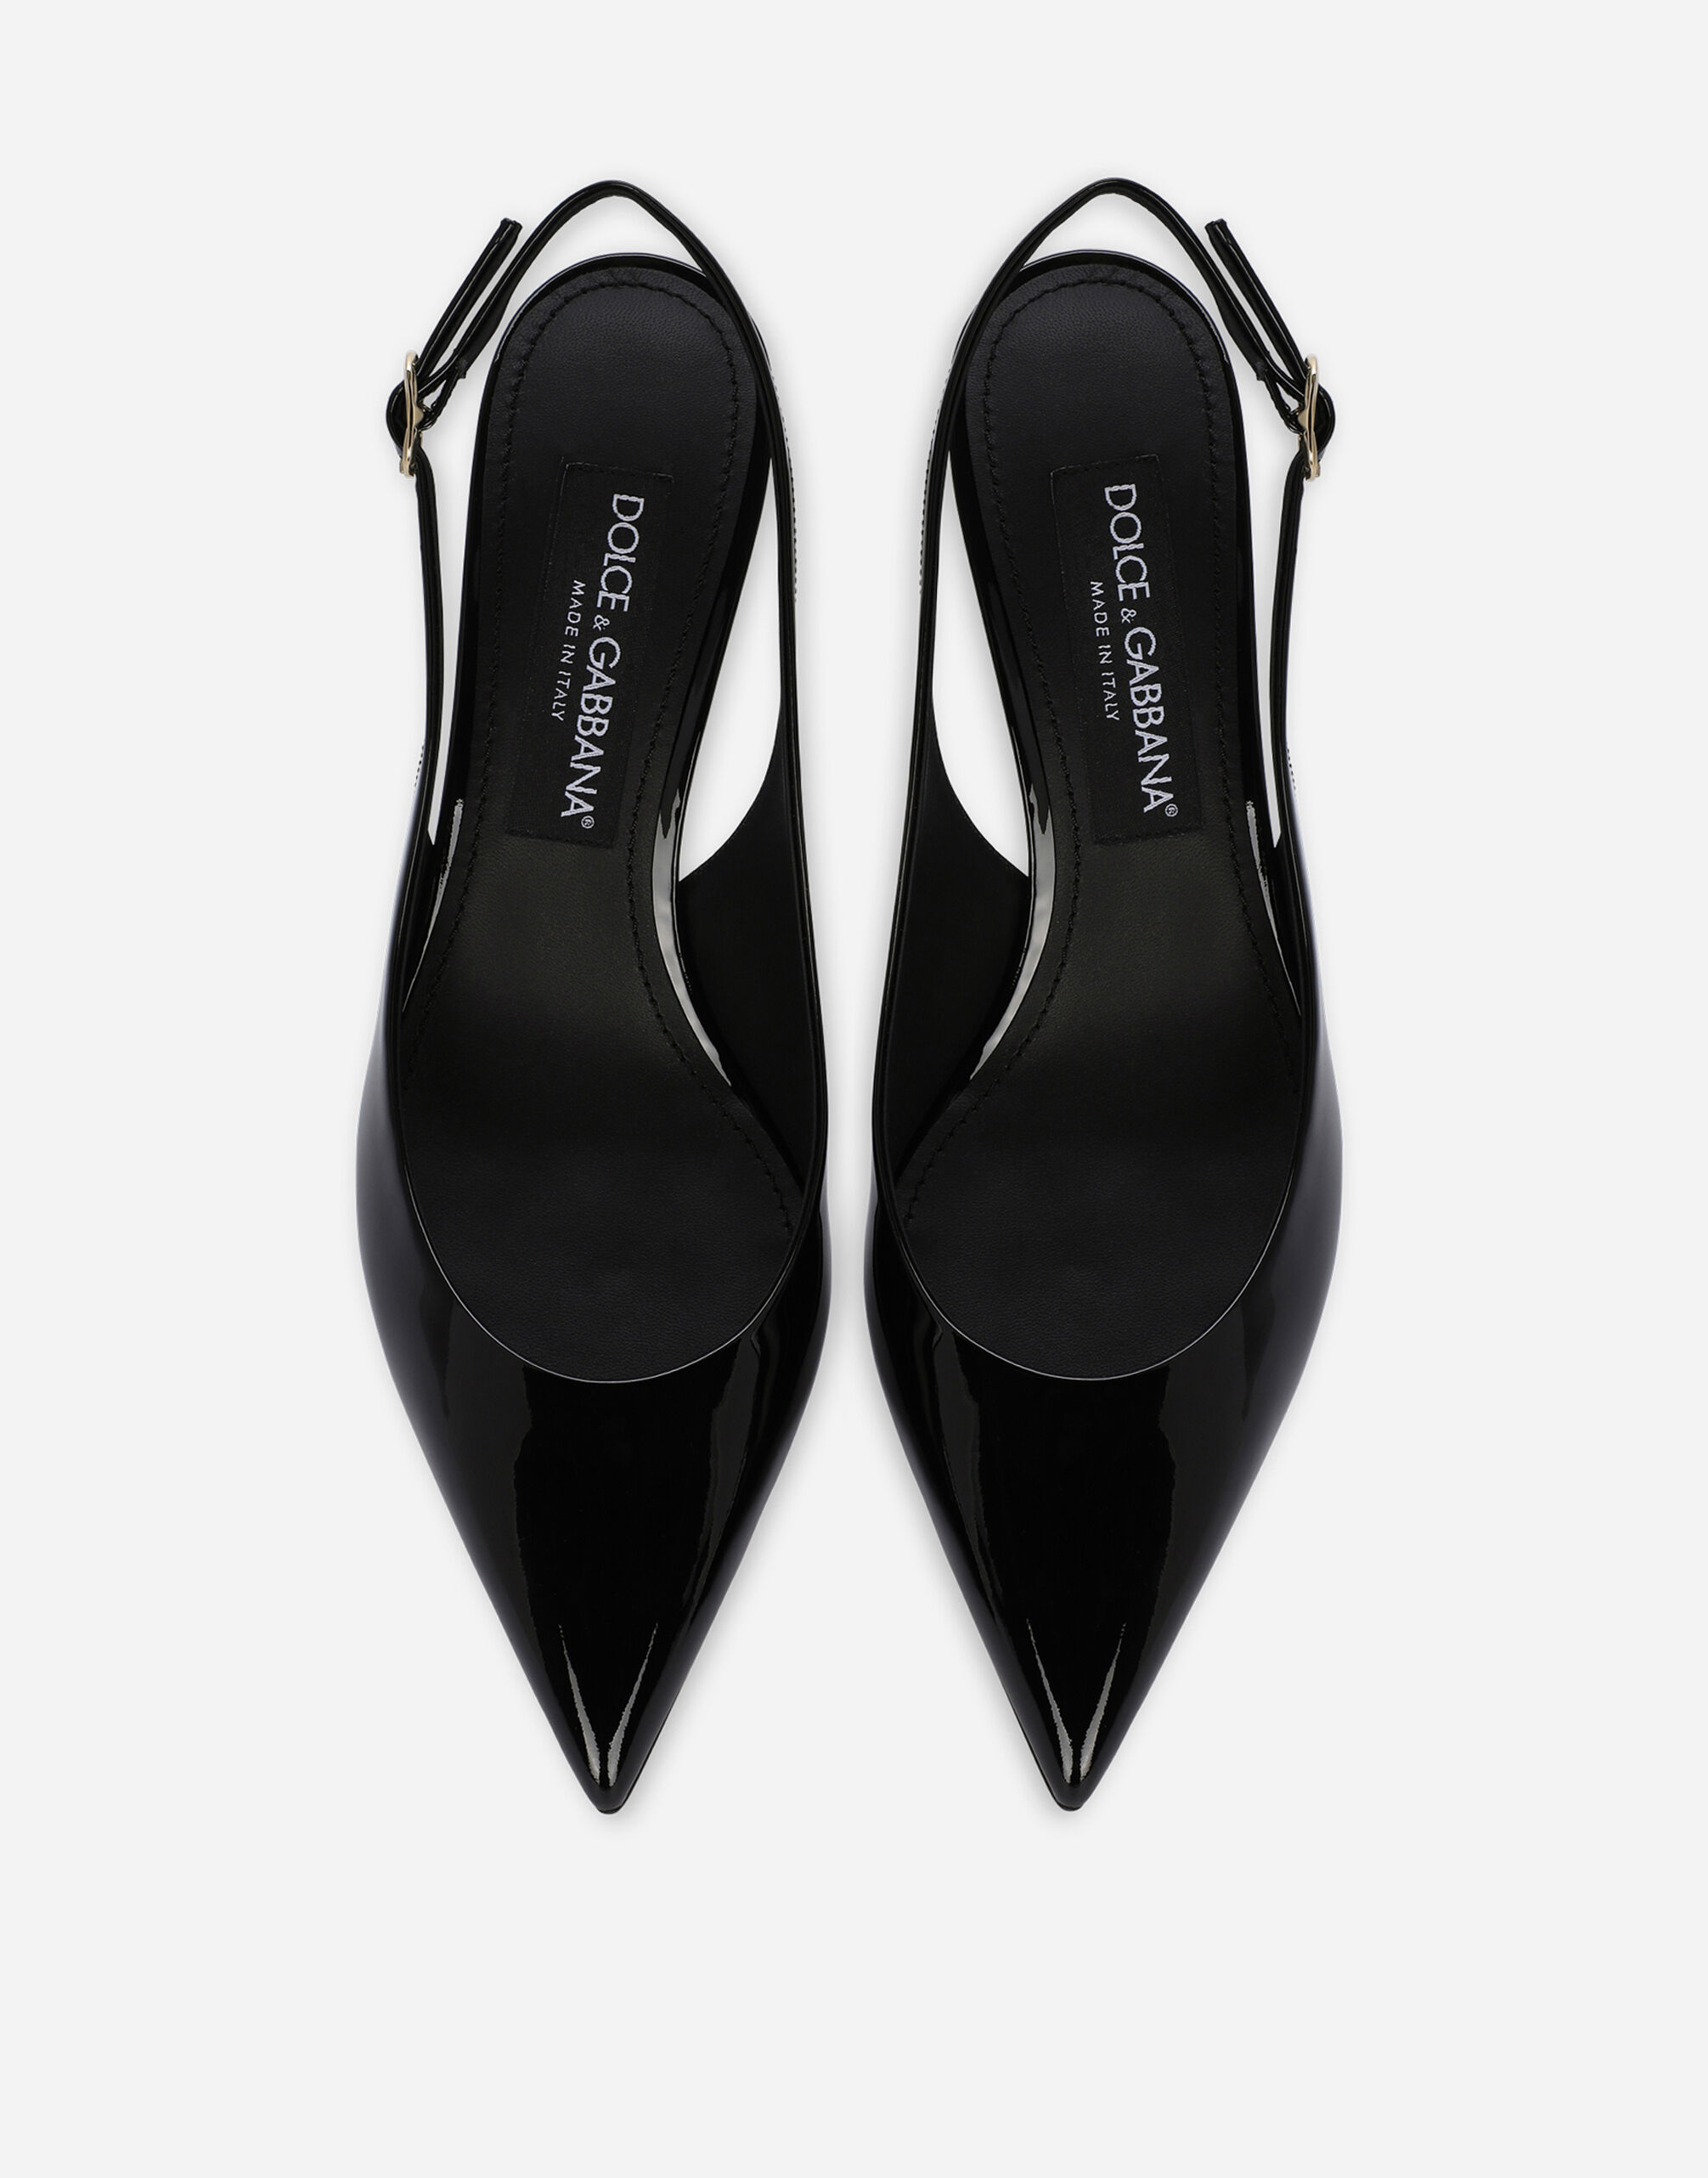 Patent leather Cardinale slingbacks in Black for | Dolce&Gabbana® US